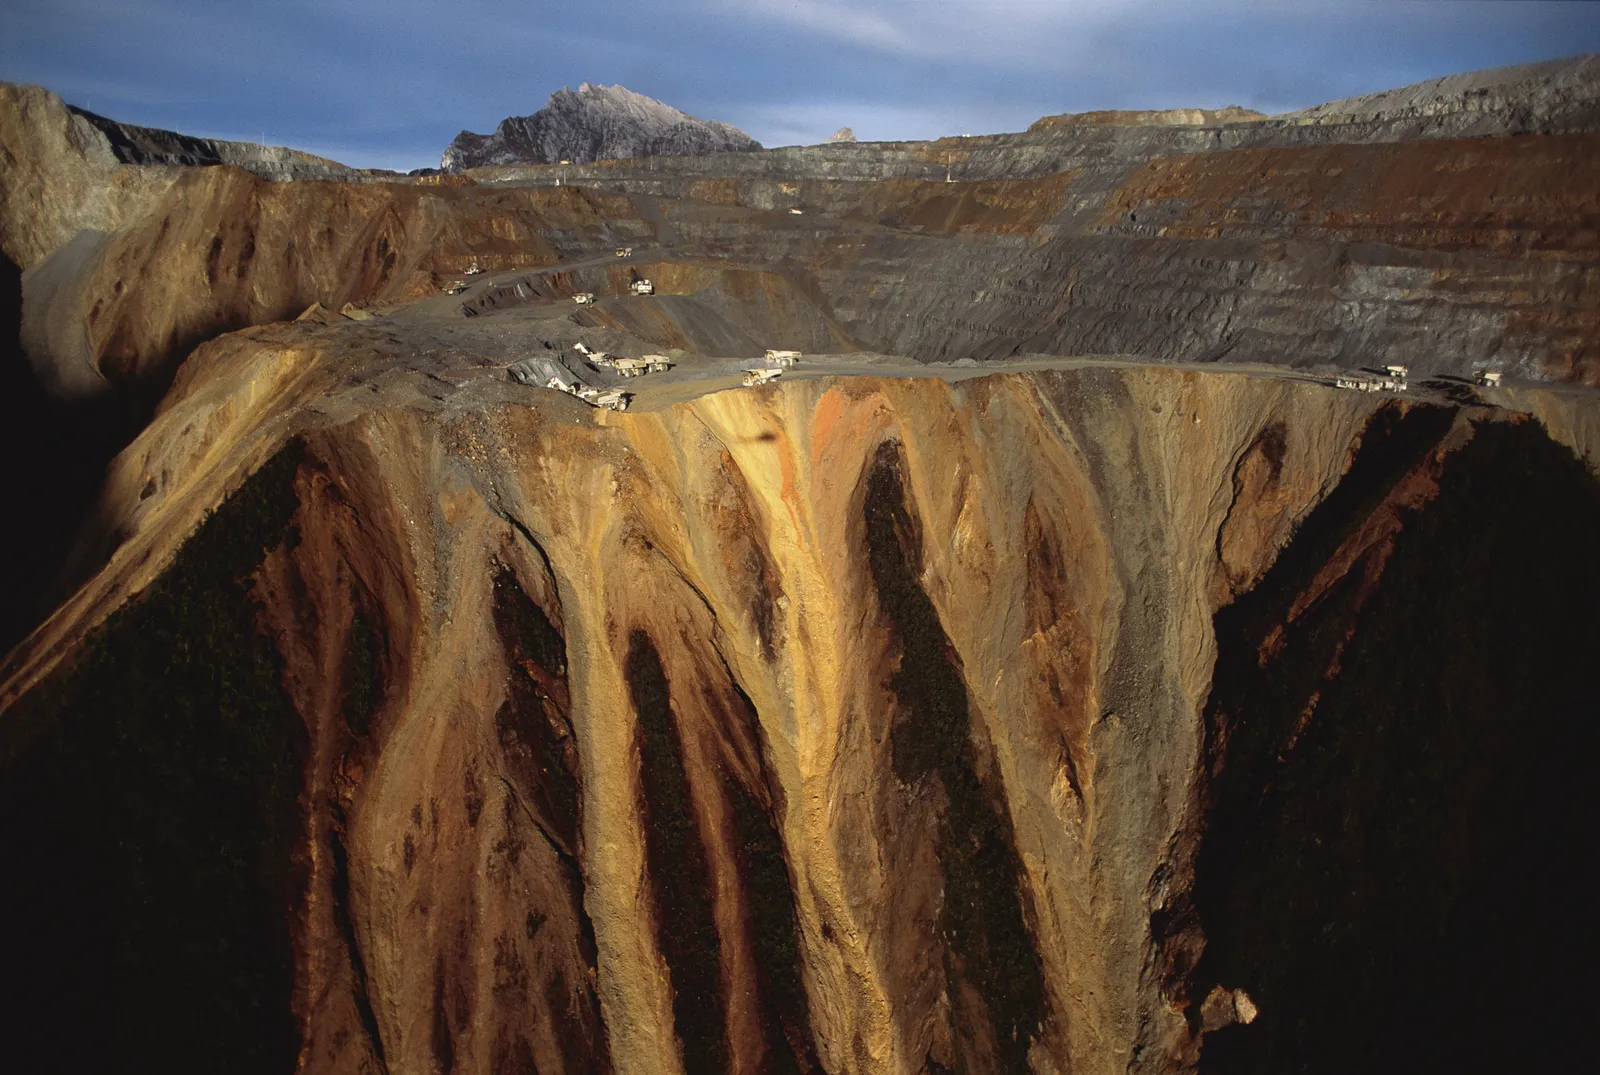 US gold mining companies face pushback for pollution